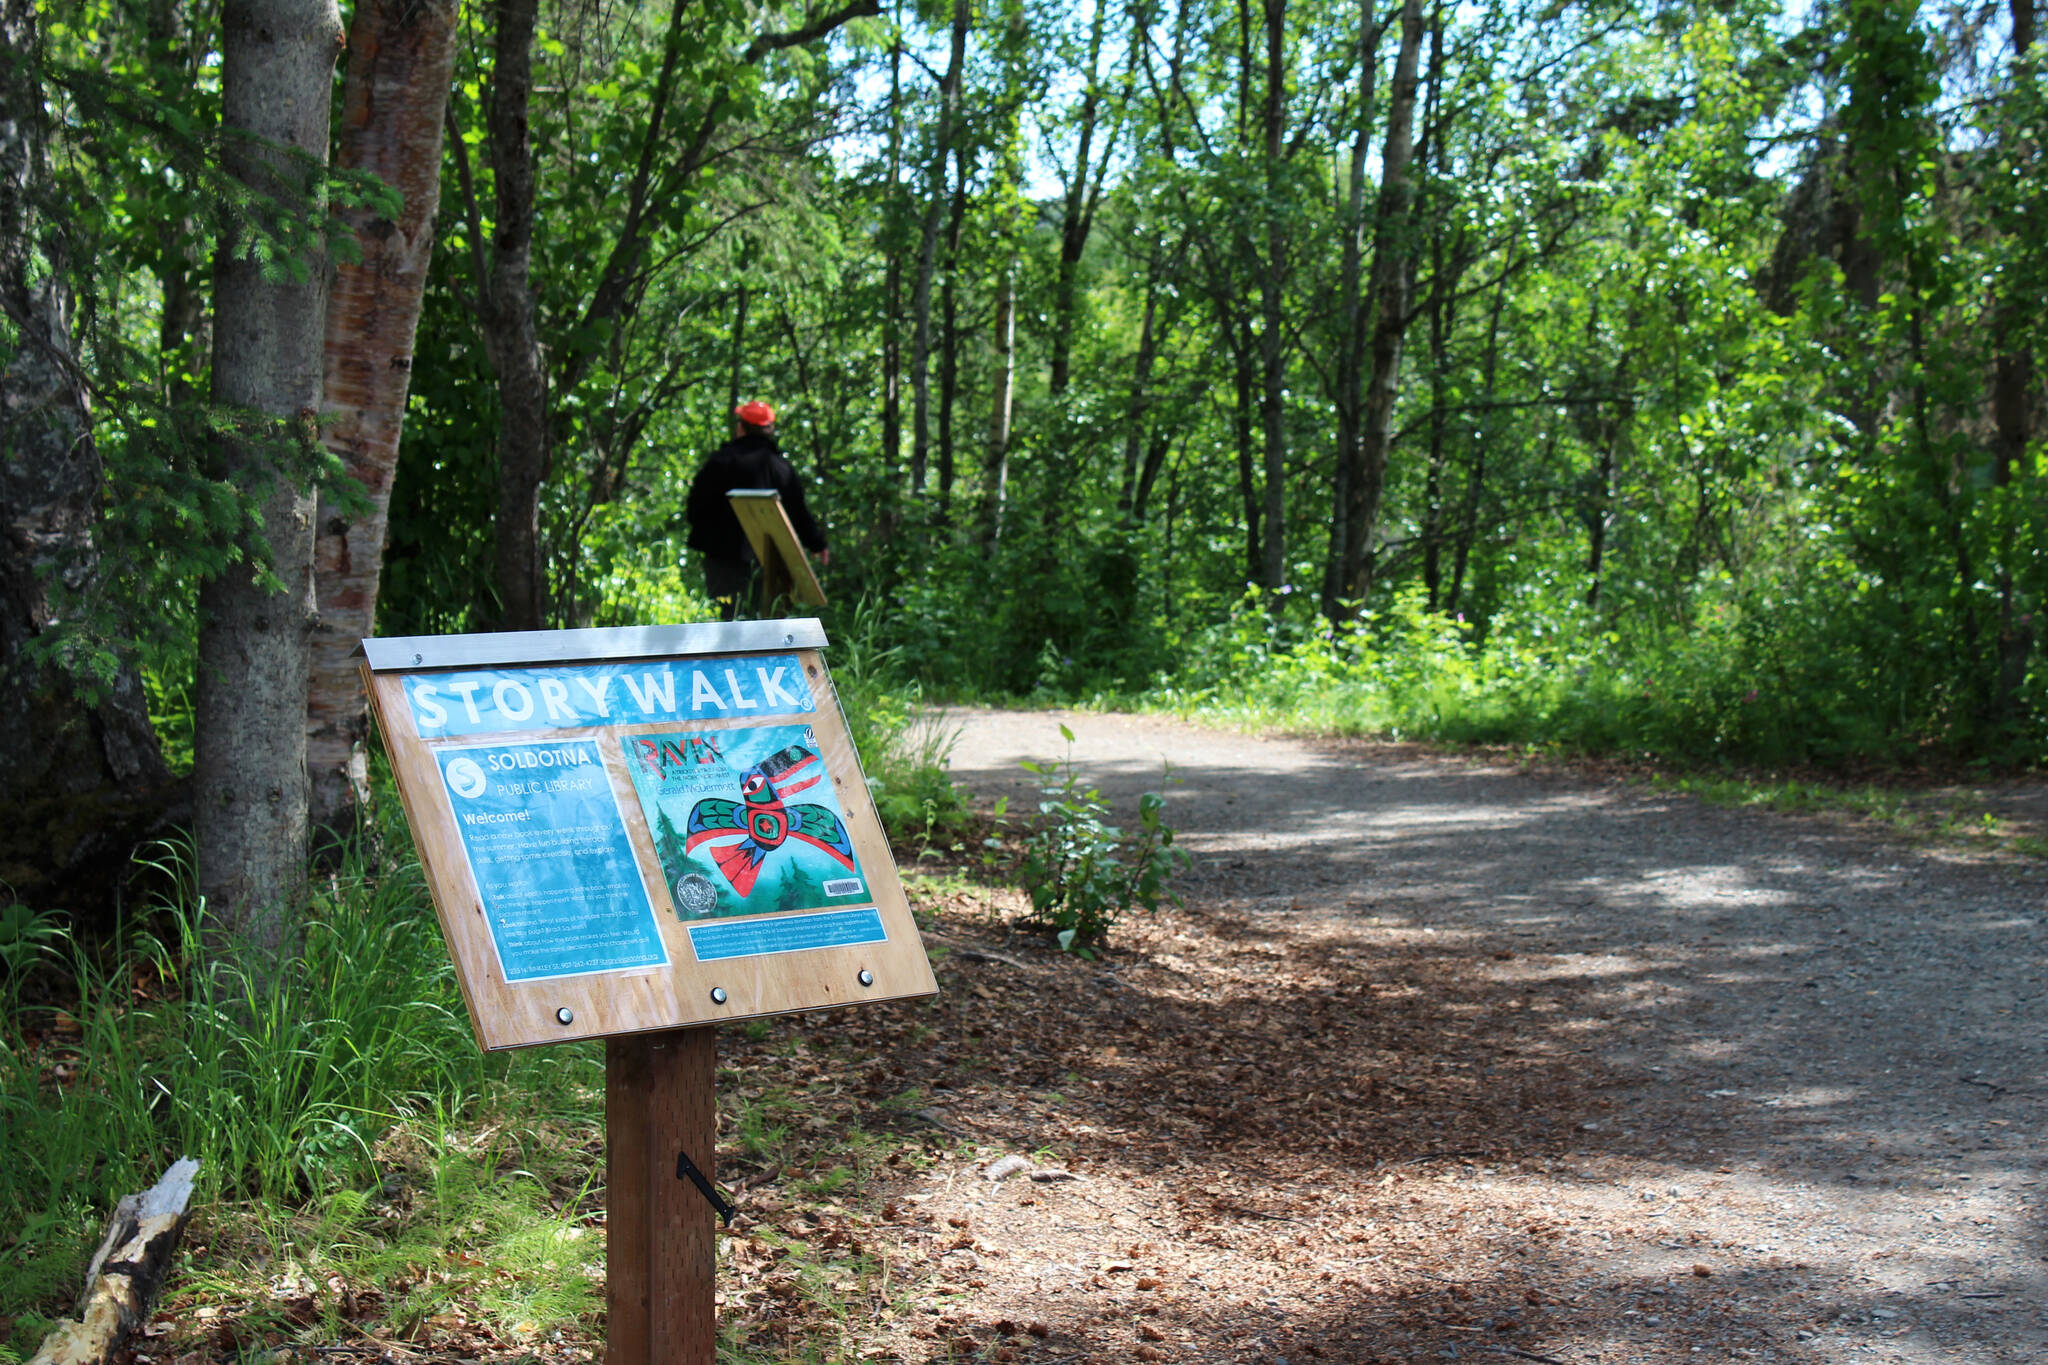 A podium marks the beginning of a StoryWalk at Soldotna Creek Park on Tuesday, June 29, 2021 in Soldotna, Alaska. The project was discontinued in August due to vandalism. (Ashlyn O’Hara/Peninsula Clarion)